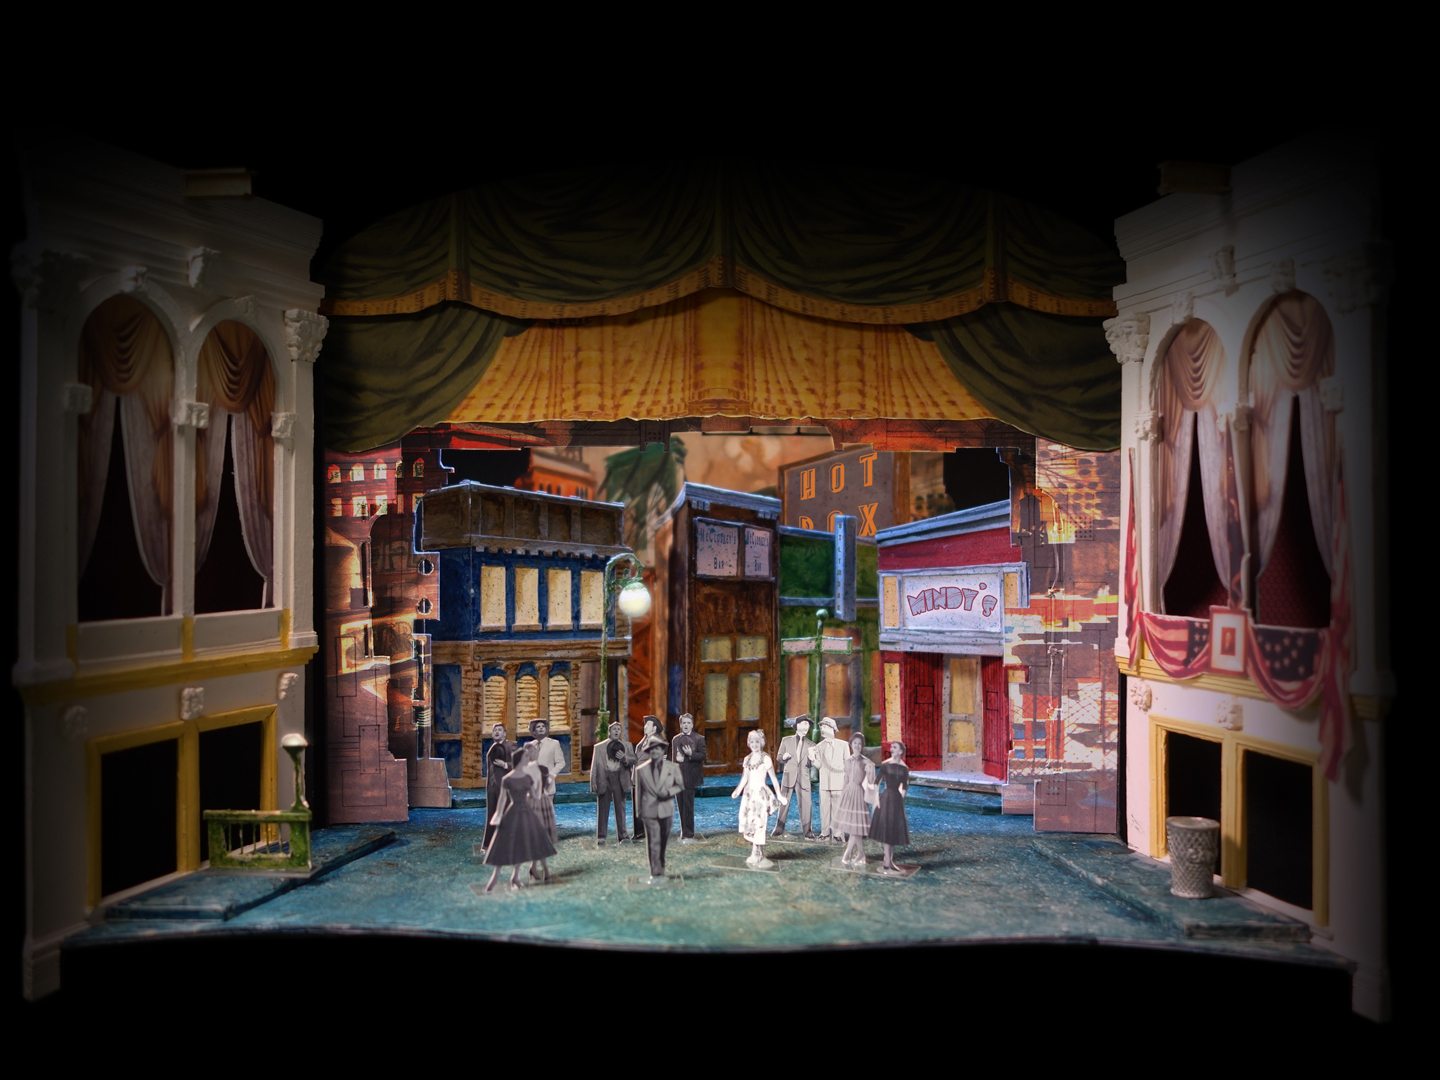 Set design for "Guys and Dolls" at Ford's Theatre features Times Square buildings in bright, primary colors.